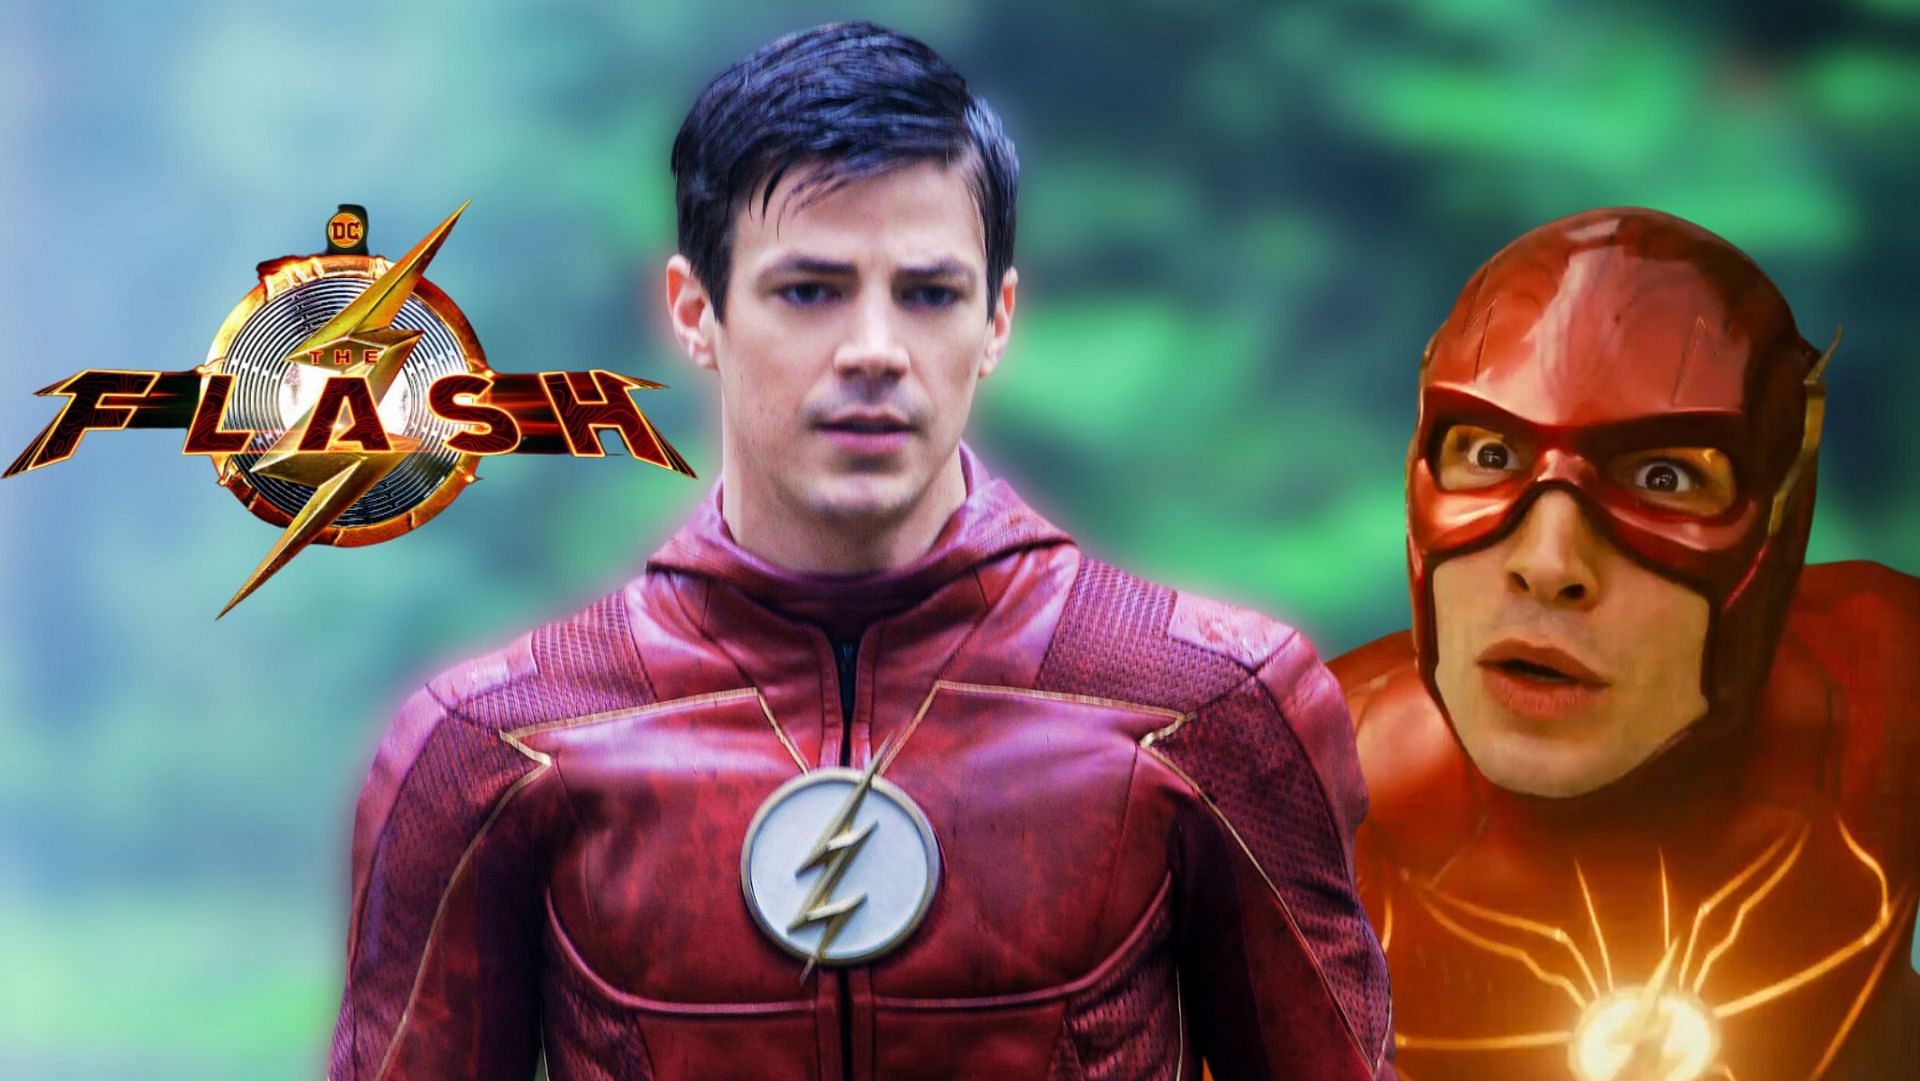 The Flash director Andy Muschietti revealed a list of characters that were almost featured as cameos in the movie, including Grant Gustin